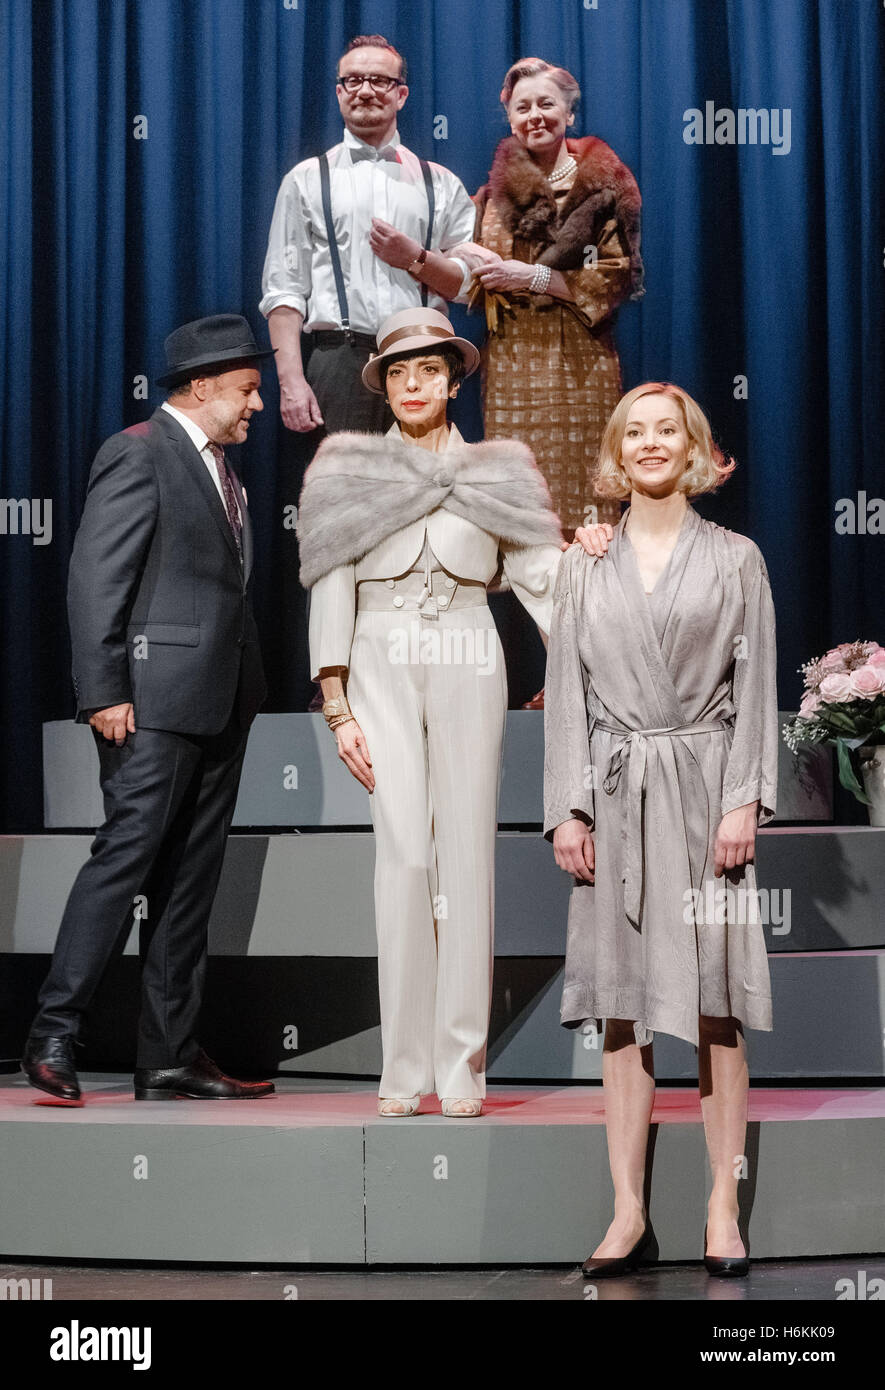 Hamburg, Germany. 27th Oct, 2016. Christoph Tomanek (L-R) as Friedrich Licht, Tim Grobe as Kurt, Helen Schneider as Joan Ford, Isabell Fischer as Irene and Teresa Weissbach as Diana Schoening act a scene from the play 'Diven' (lit. Divas) during a press rehearsal in Hamburg, Germany, 27 October 2016. The world premiere takes place on 30 October 2016 in the Hamburger Kammerspiele theater. Photo: MARKUS SCHOLZ/dpa/Alamy Live News Stock Photo